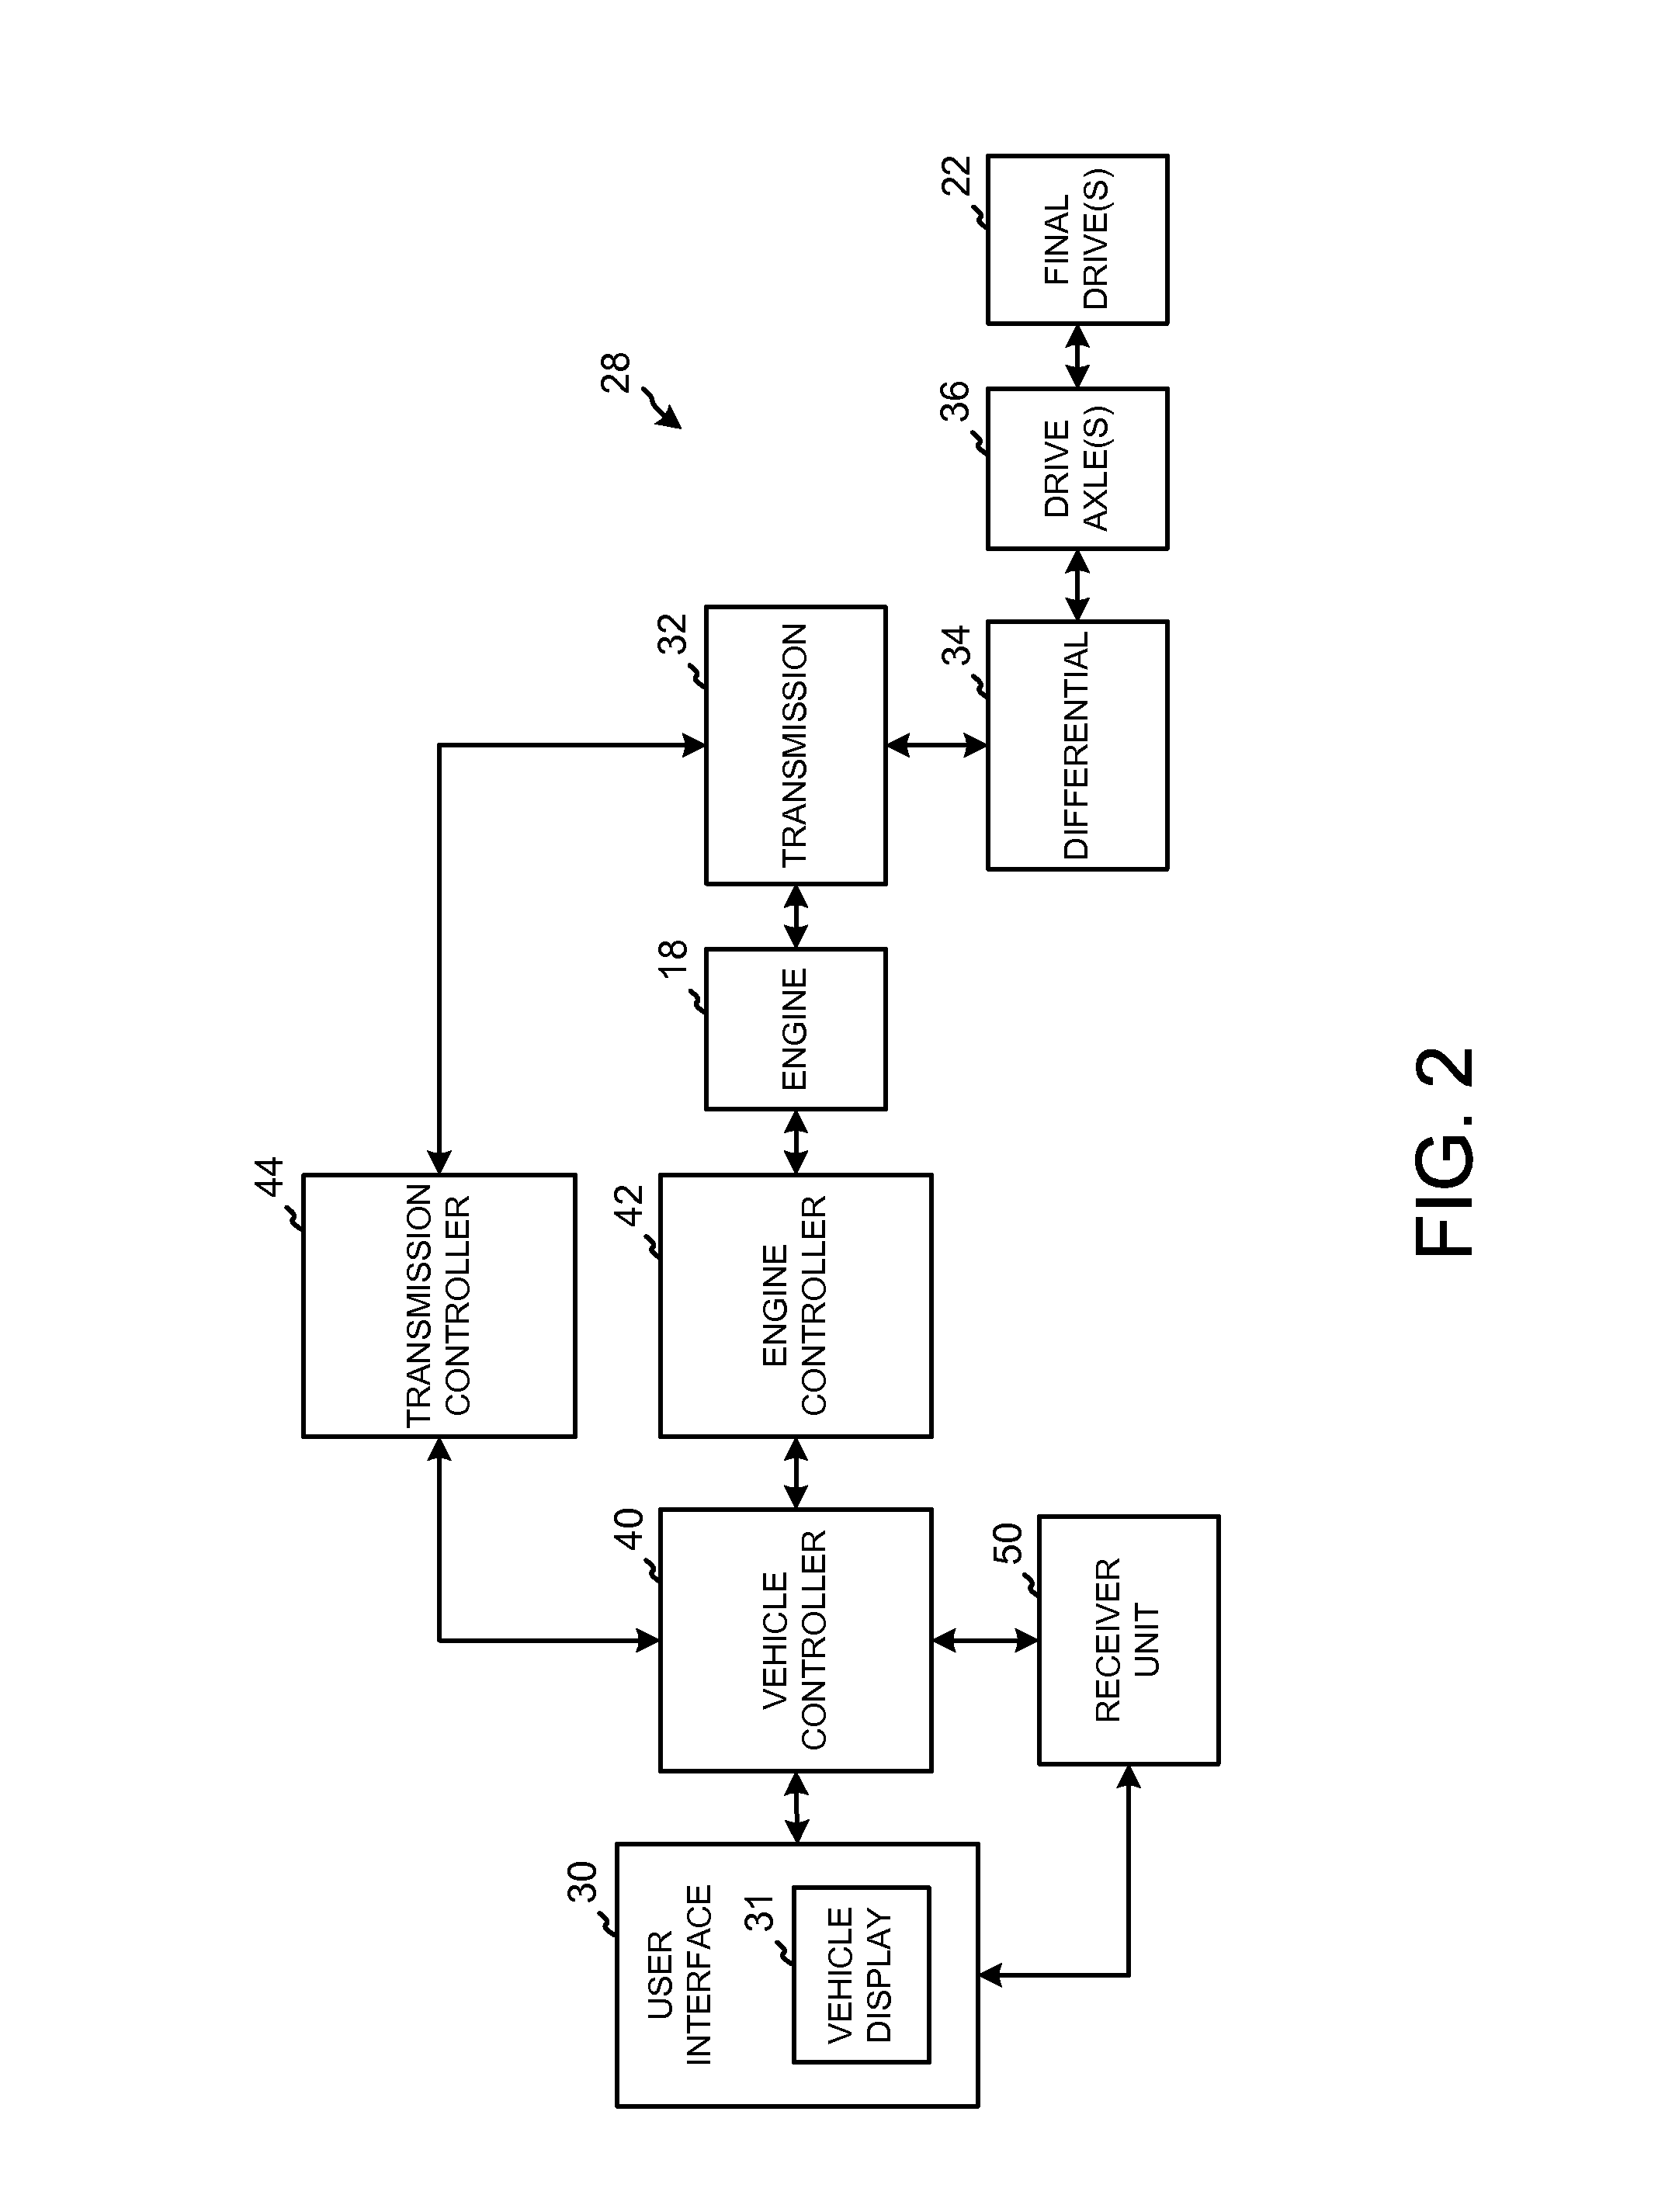 Liquid level detection system for a driveline component